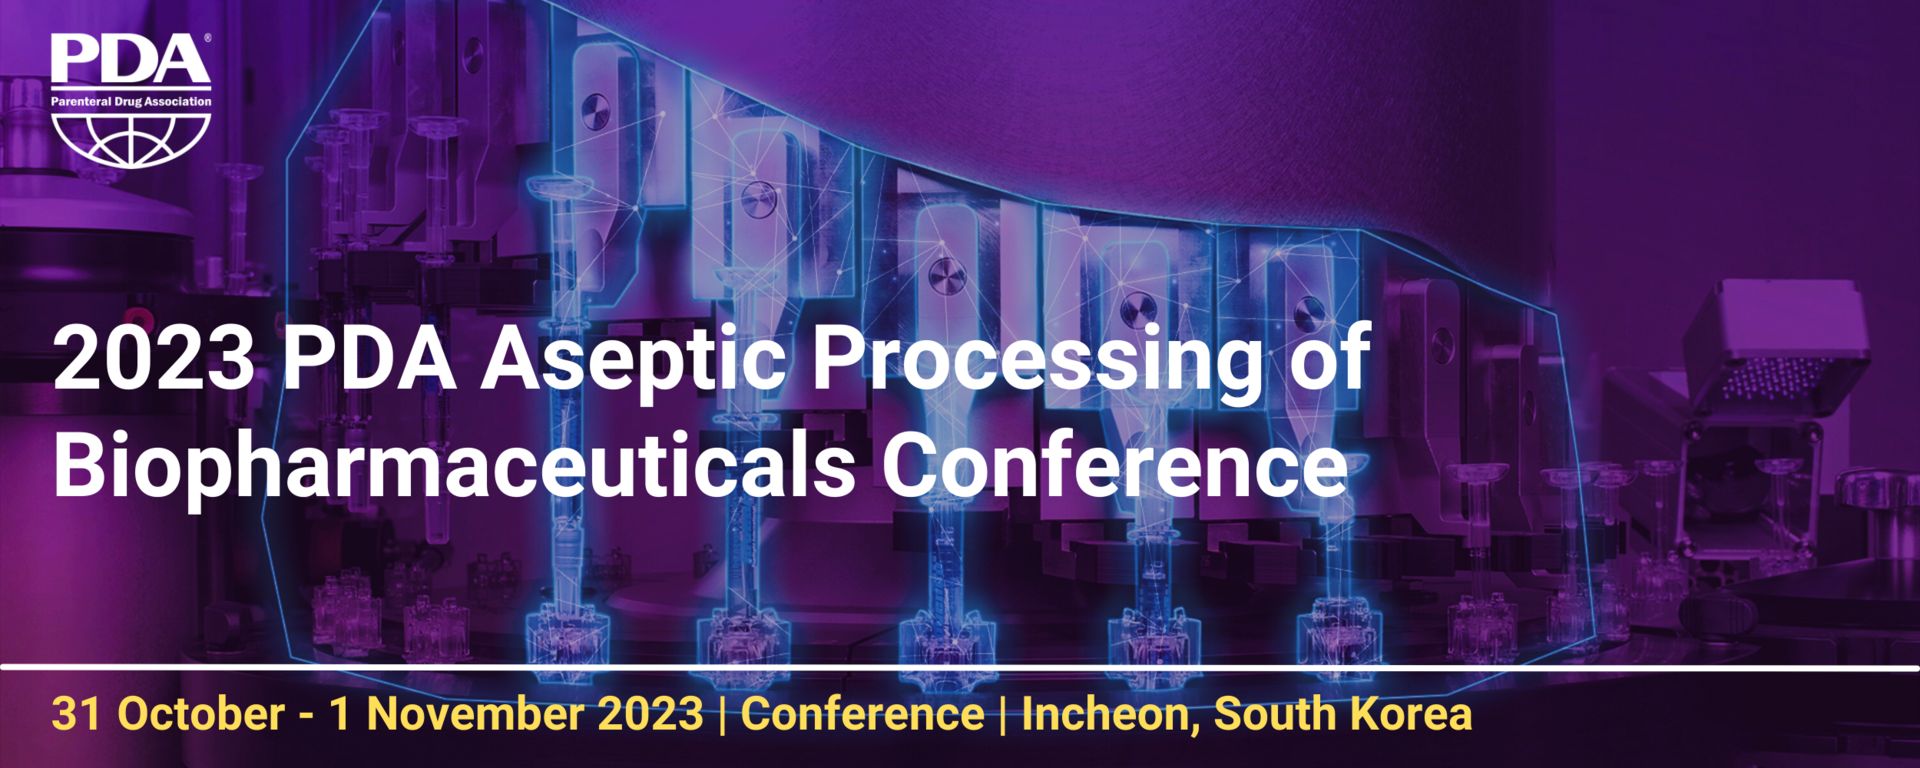 2023 PDA Aseptic Processing of Biopharmaceuticals Conference, Incheon, South korea